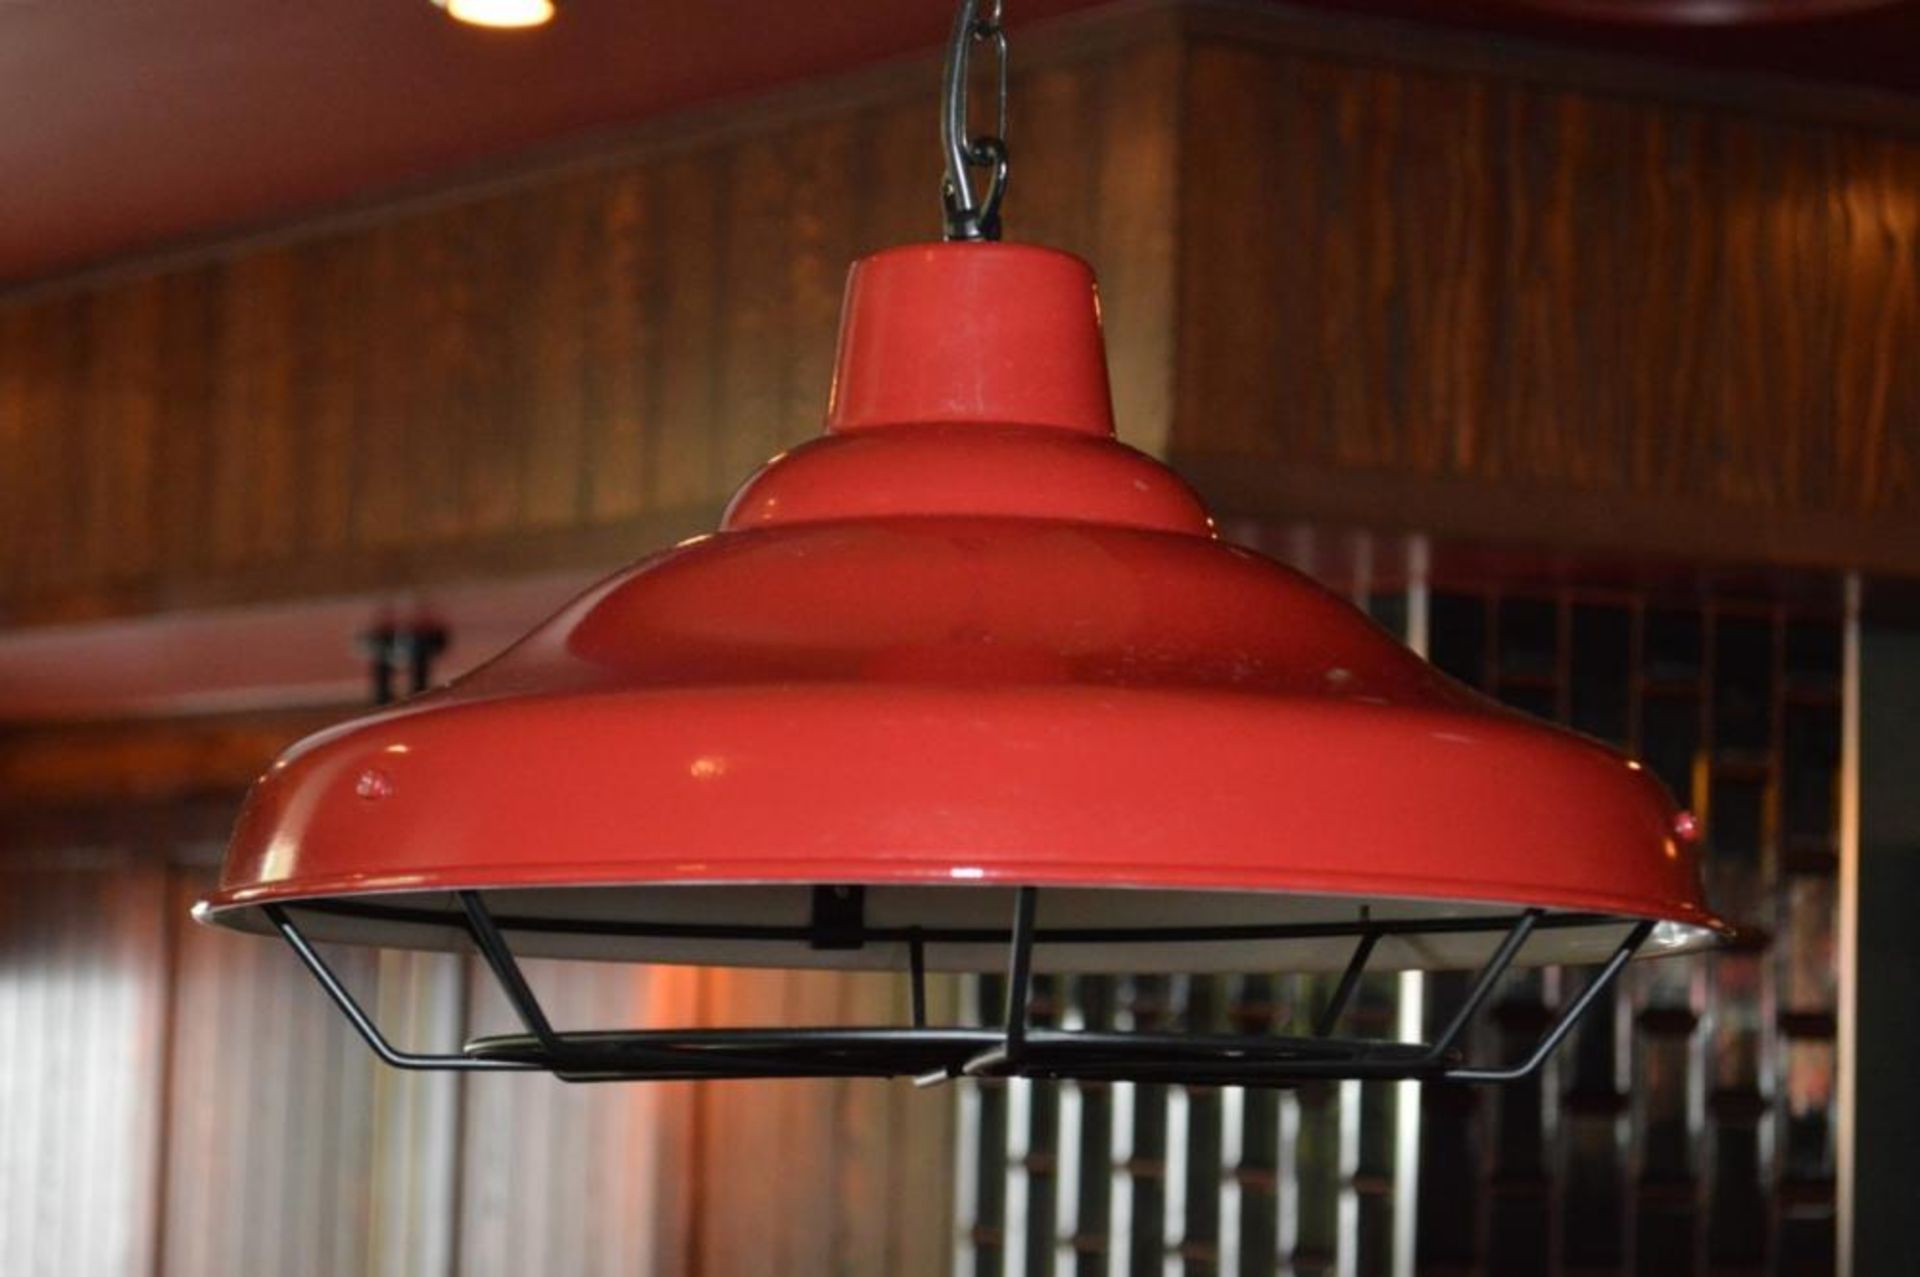 4 x Industrial Style Light Pendants With Cage - Contemporary Red Finish - 45cm Diameter 100cm Drop - Image 2 of 7